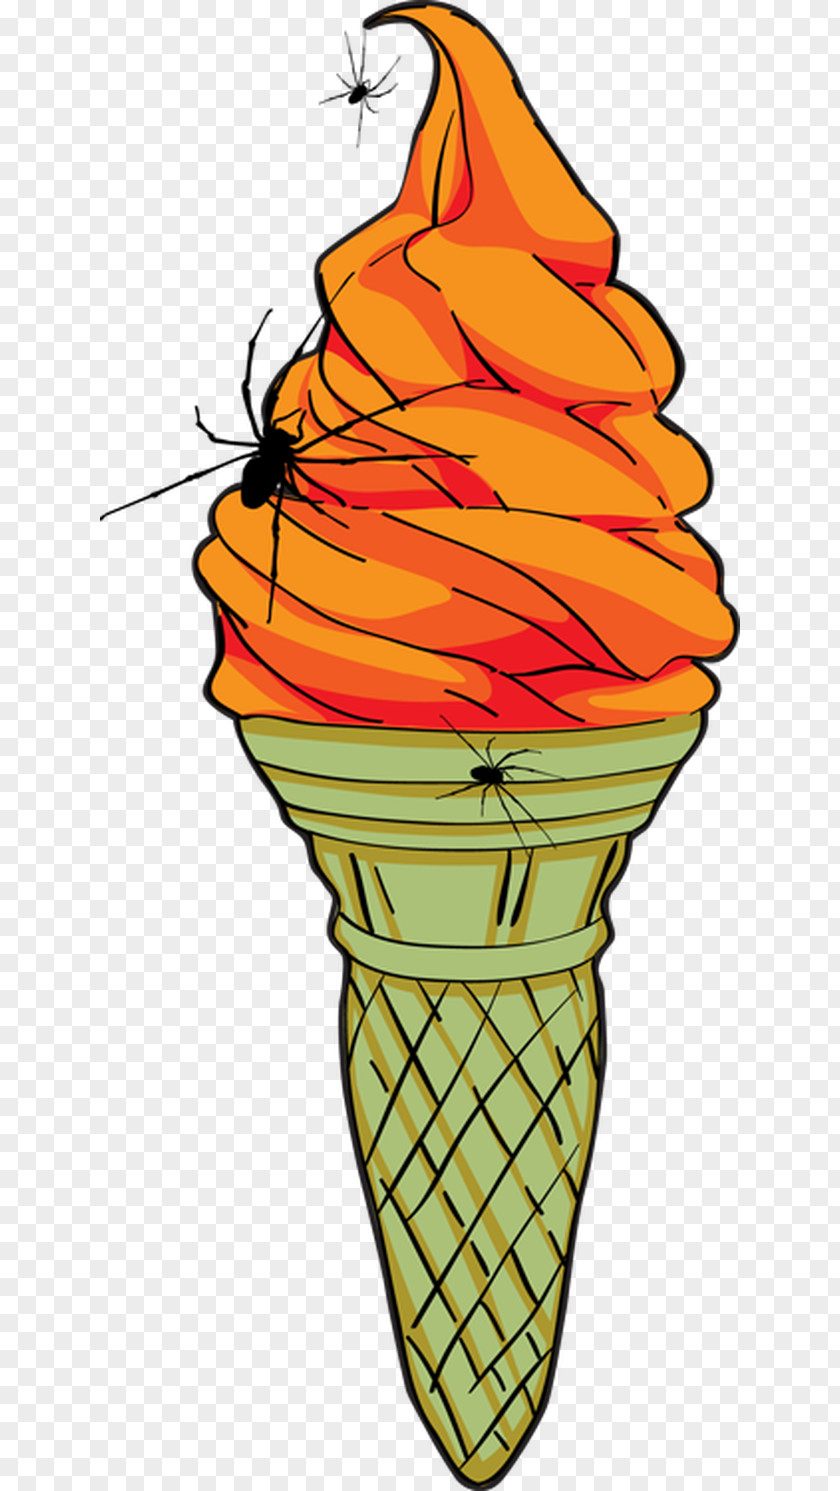 Popsicle Pennant Ice Cream Cones Clip Art Vector Graphics PNG